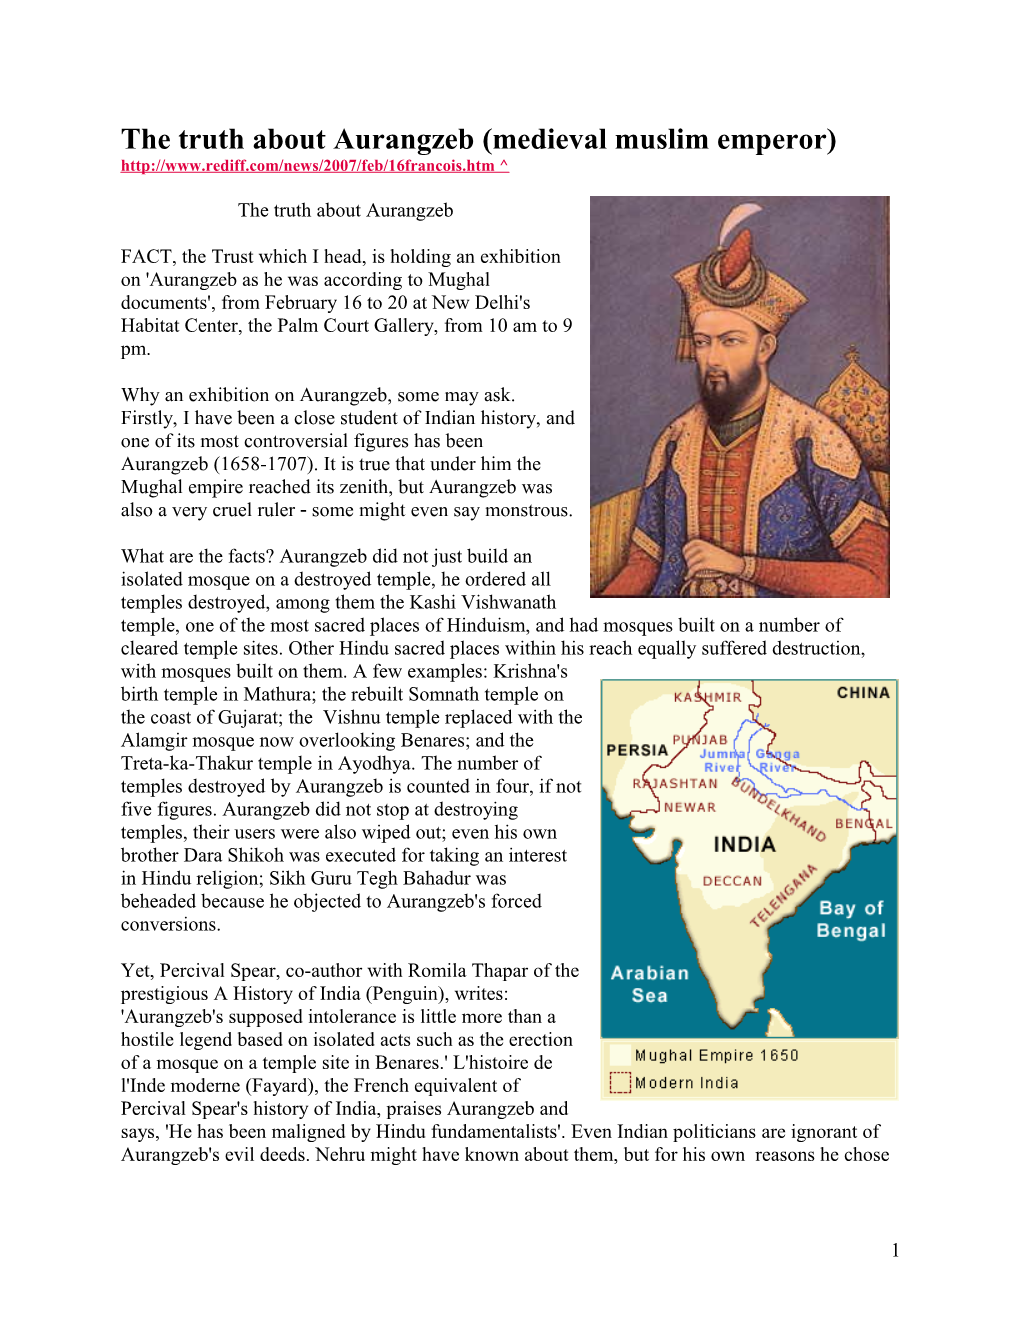 The Truth About Aurangzeb (Medieval Muslim Emperor)